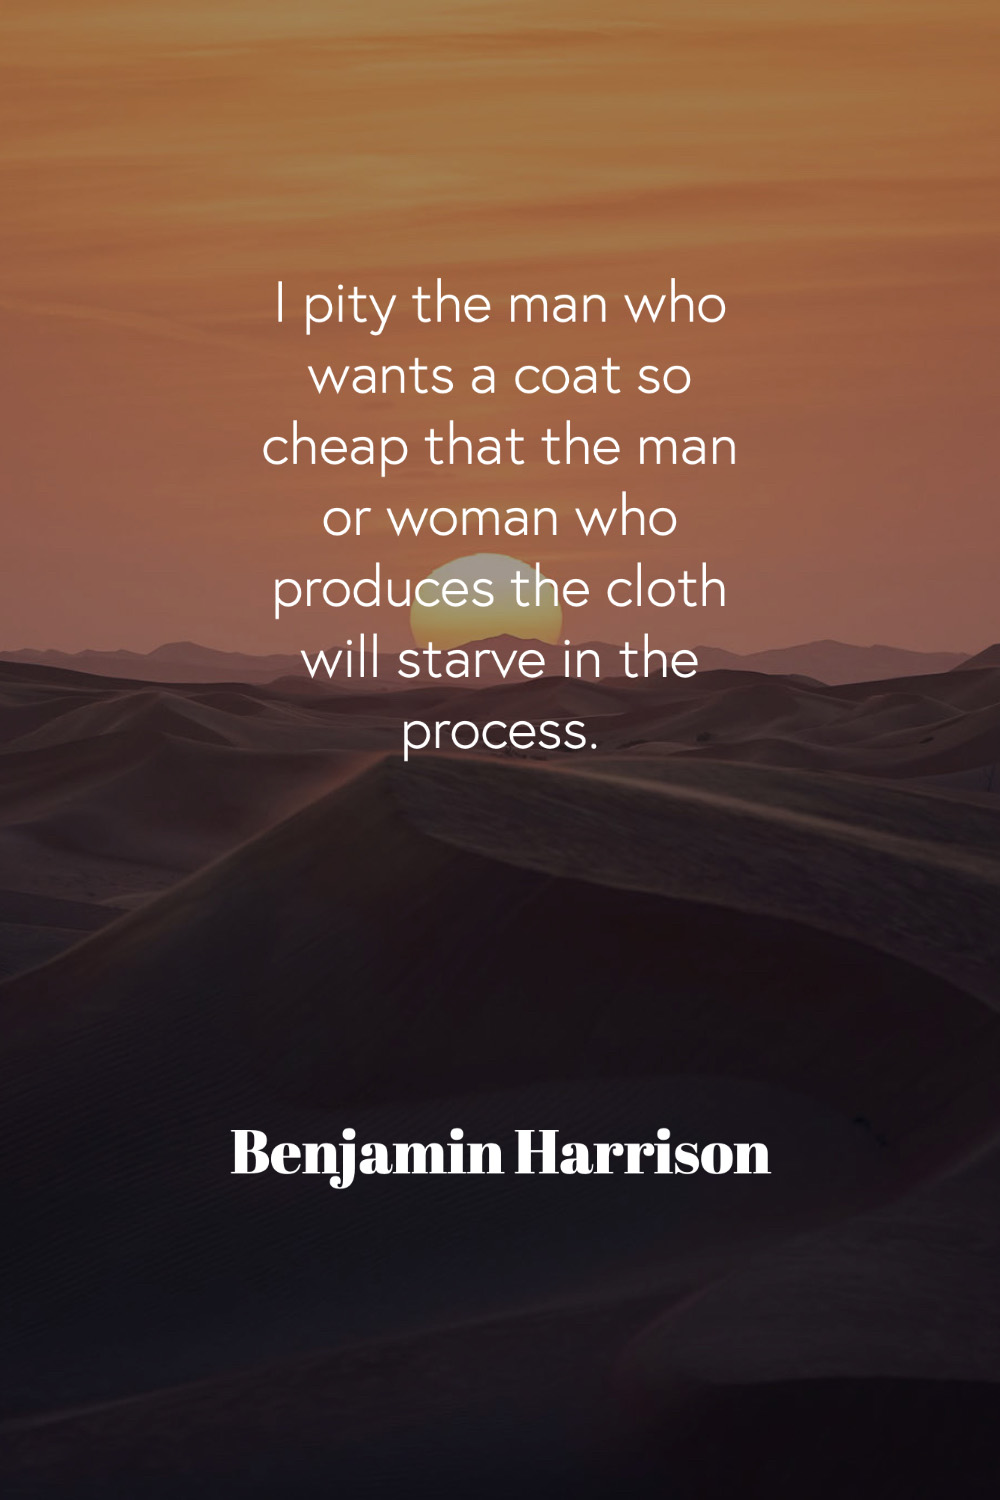 Quote by Benjamin Harrison